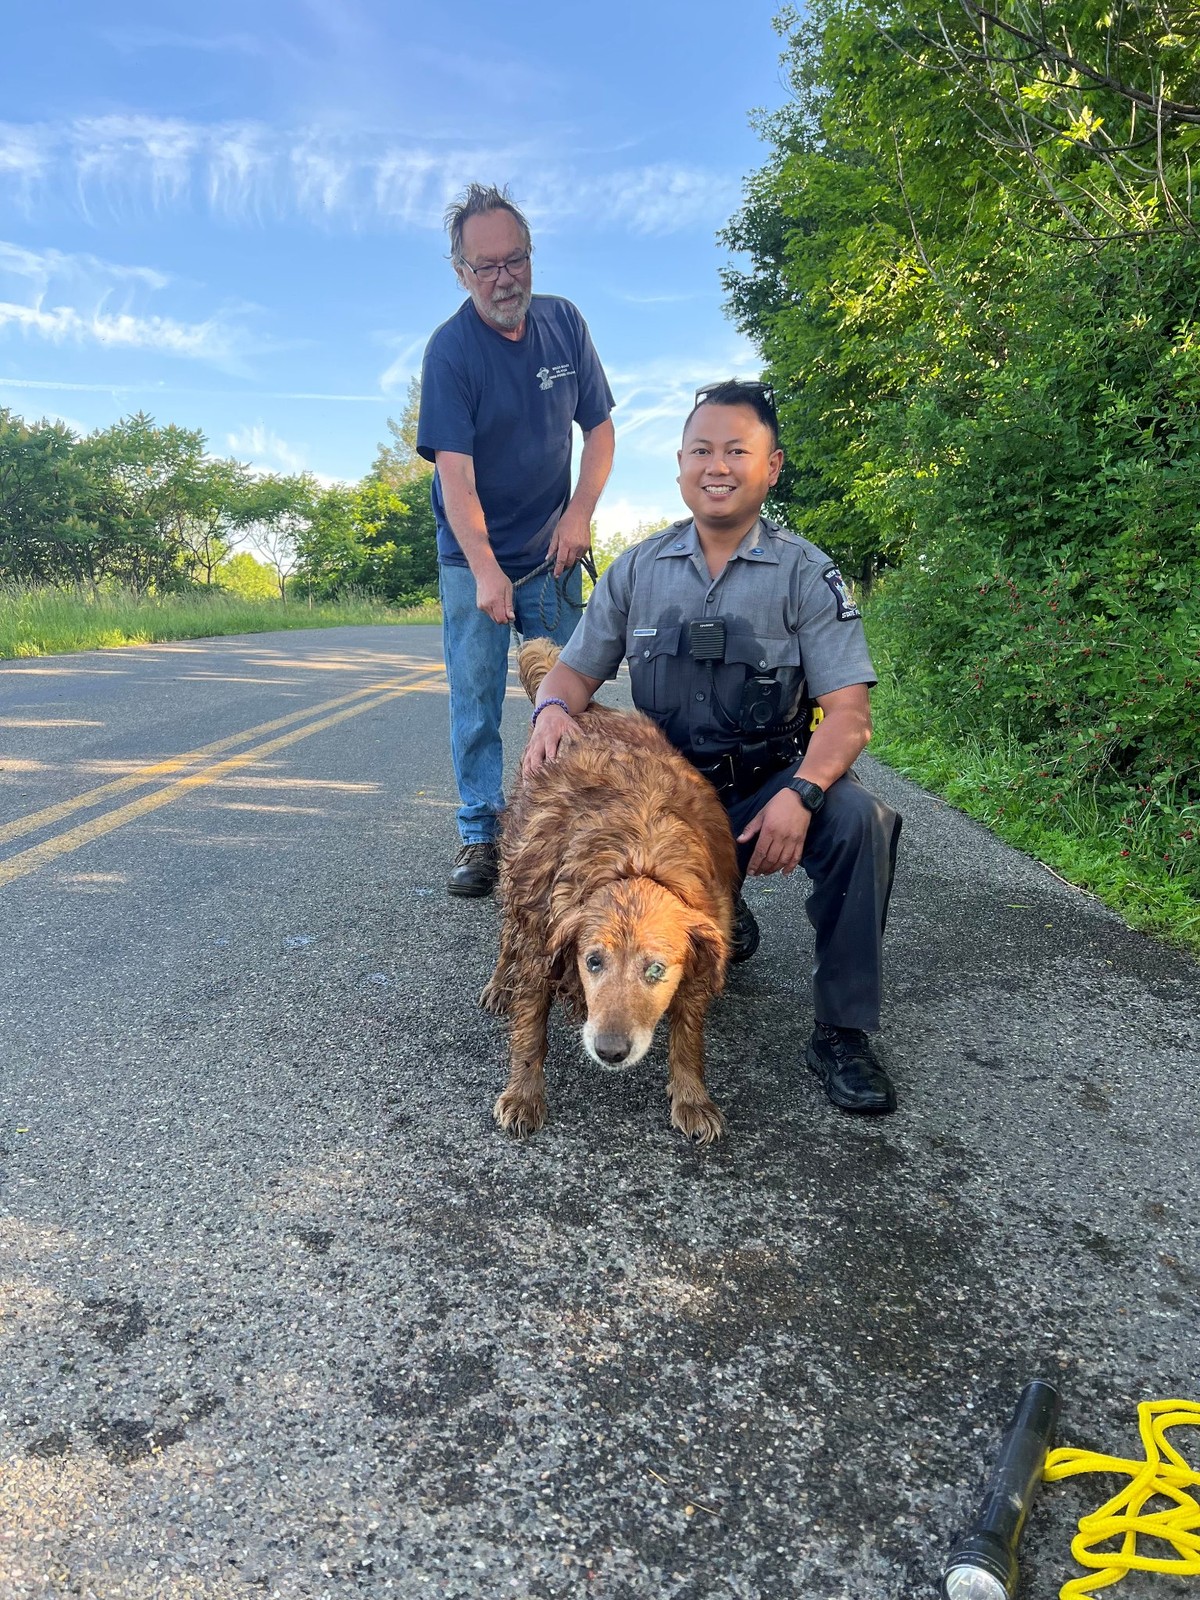  Golden retriever missing for two days rescued by police in sewer pipe |  pets

